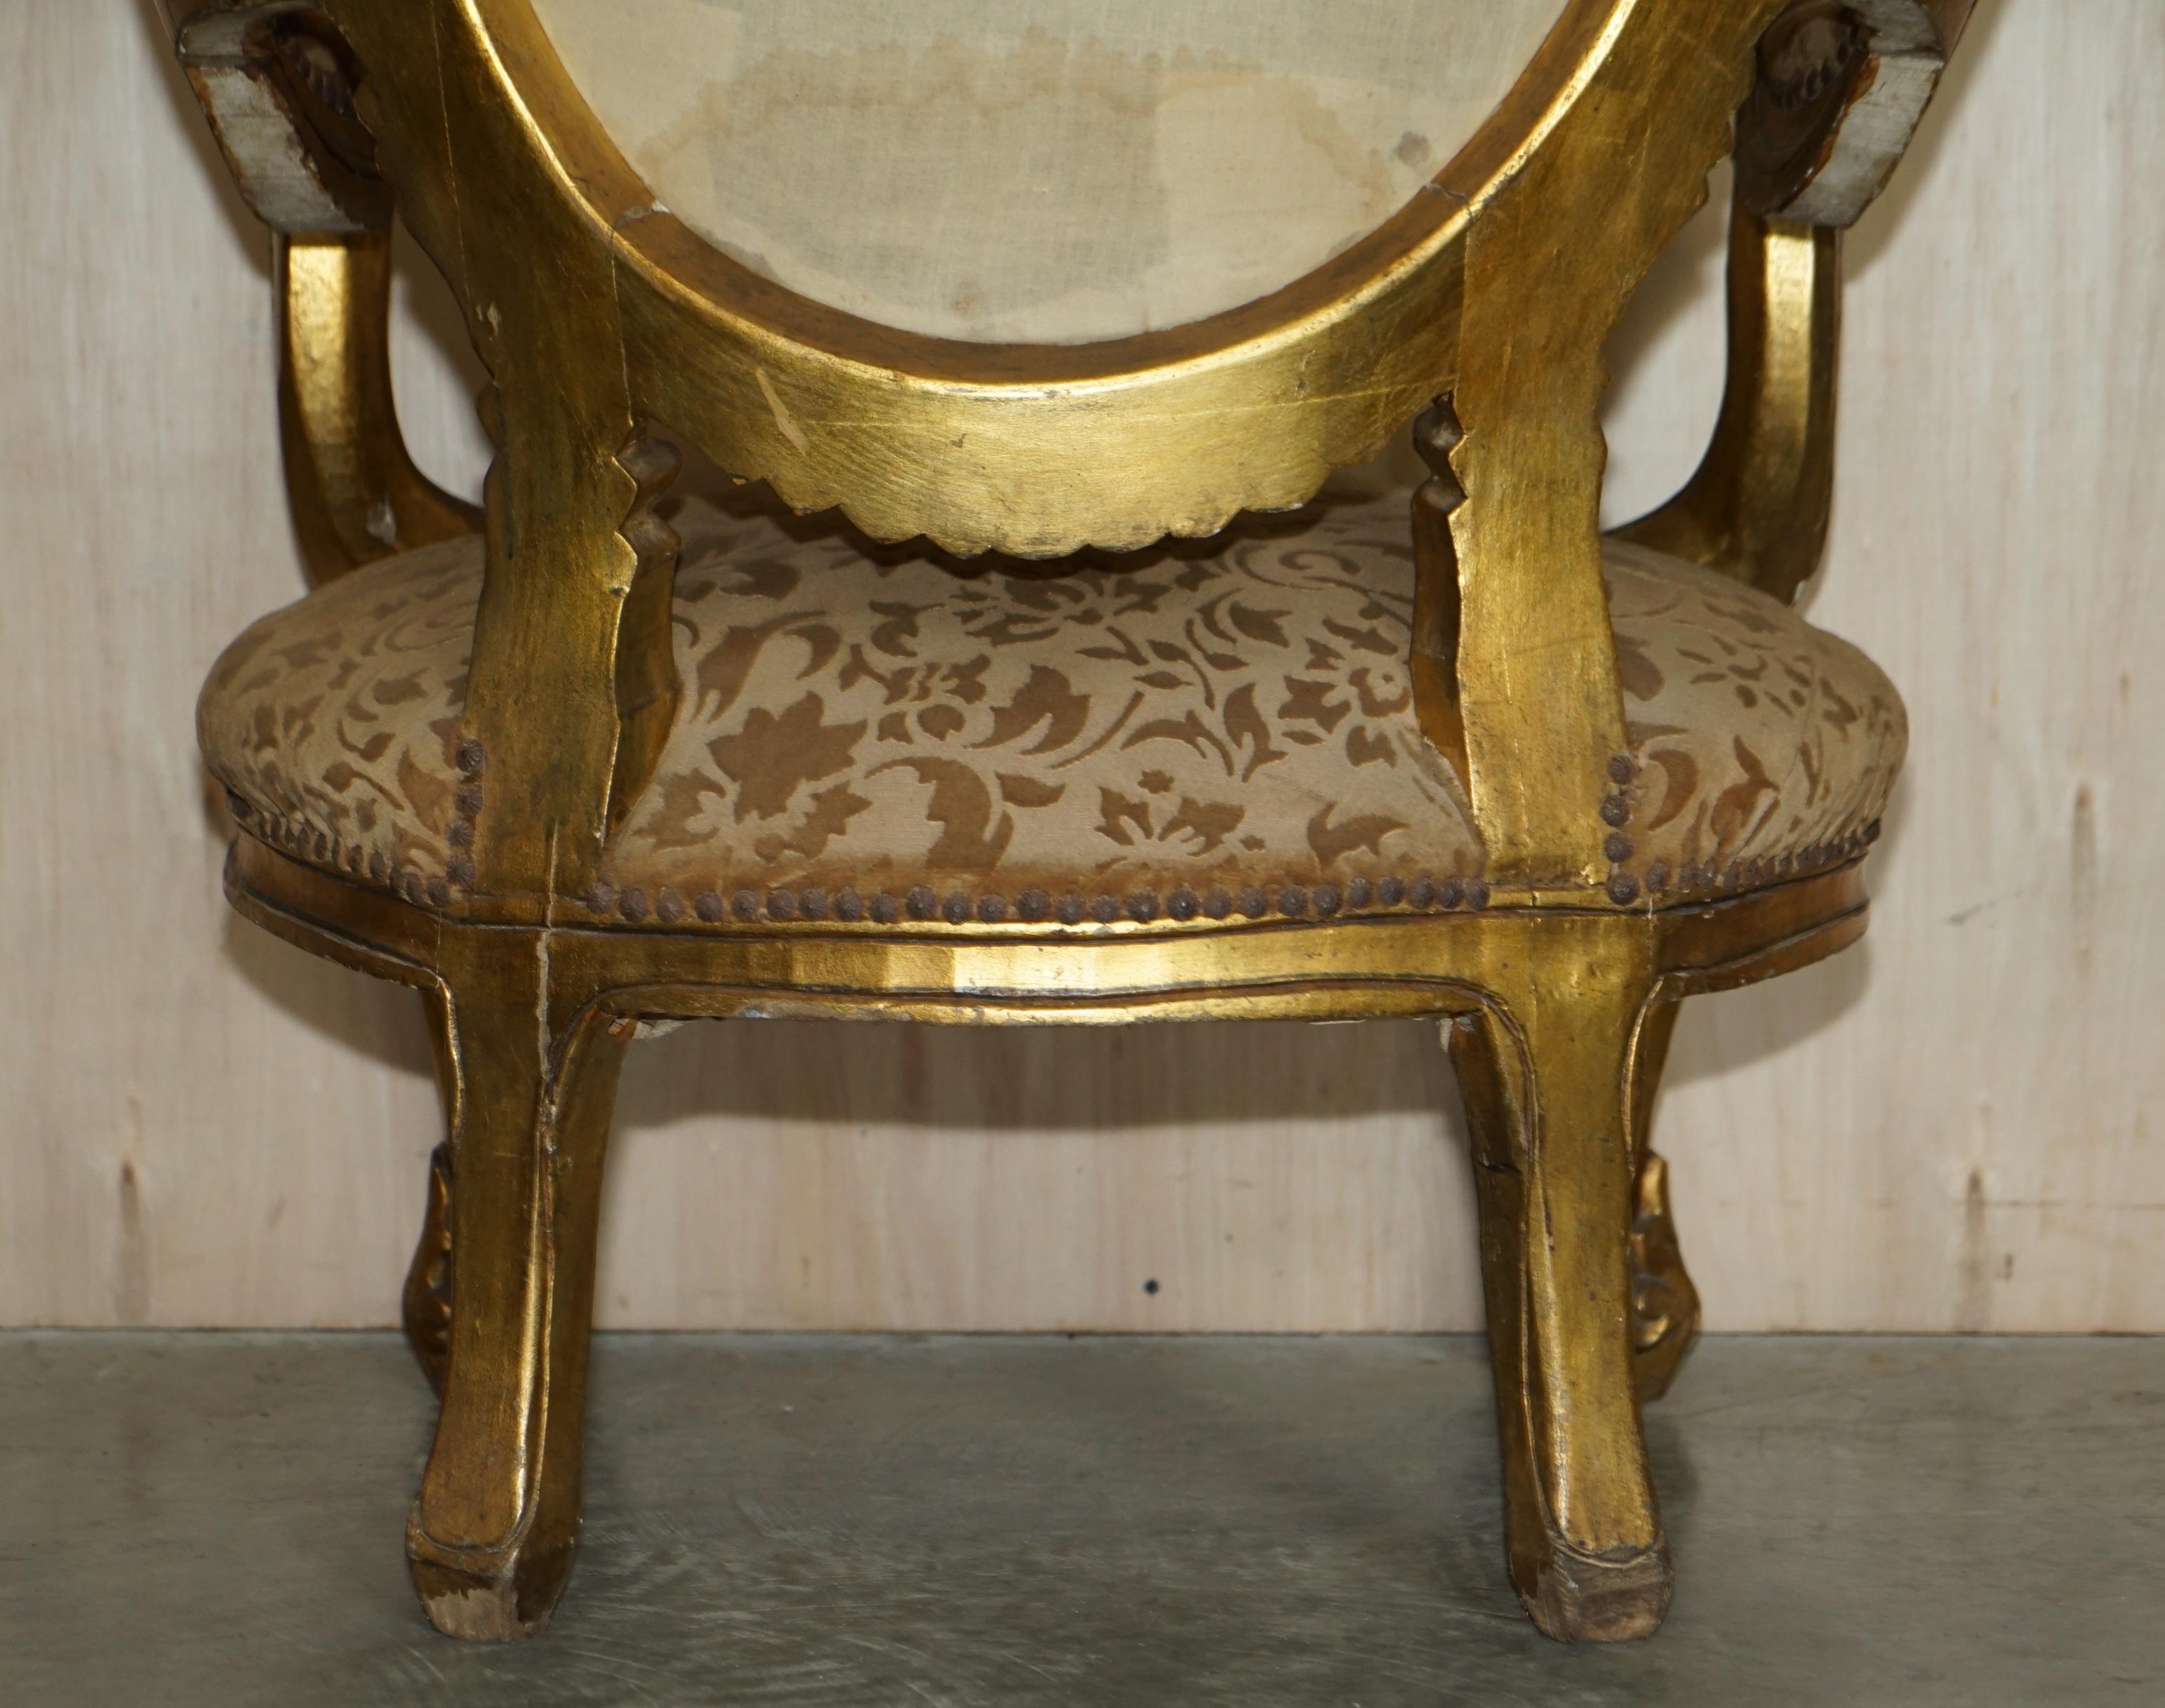 PAIR OF ANTIQUE ORIGINAL GiLTWOOD FINISH FRENCH LOUIS XV FAUTEUILS ARMCHAIRS For Sale 7